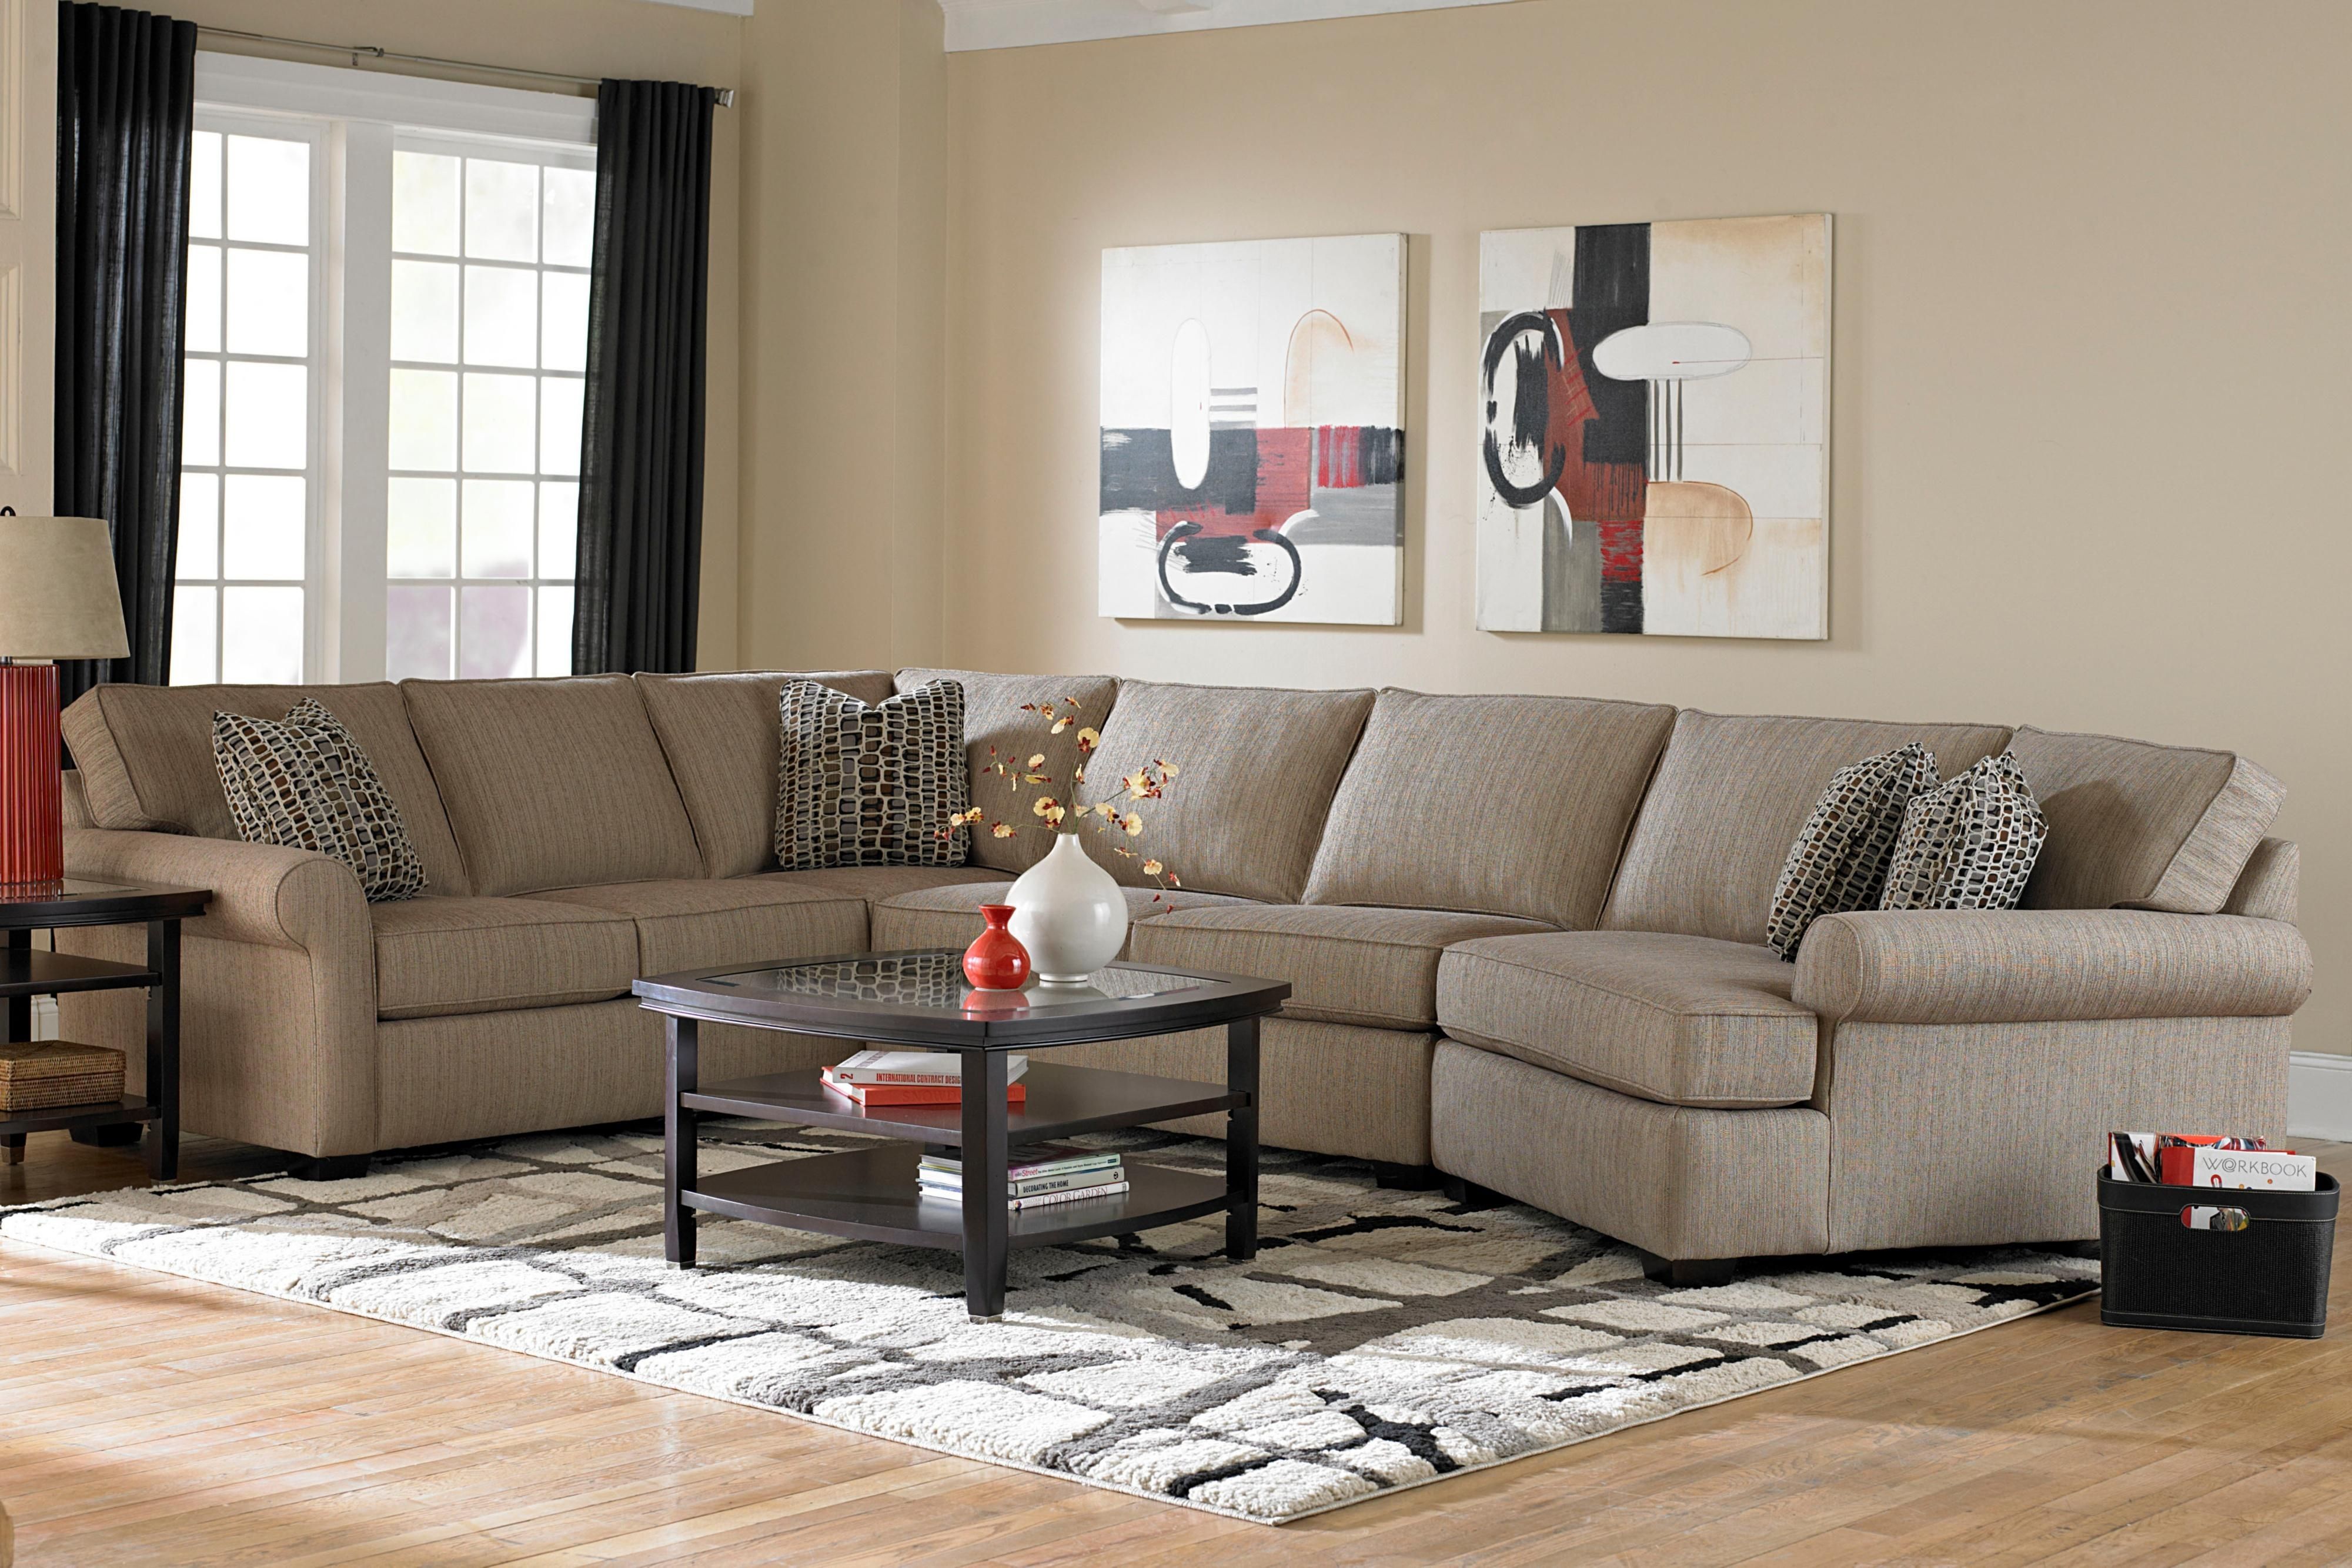 Broyhill Furniture Ethan Transitional Sectional Sofa With Right With Jacksonville Nc Sectional Sofas (View 9 of 10)